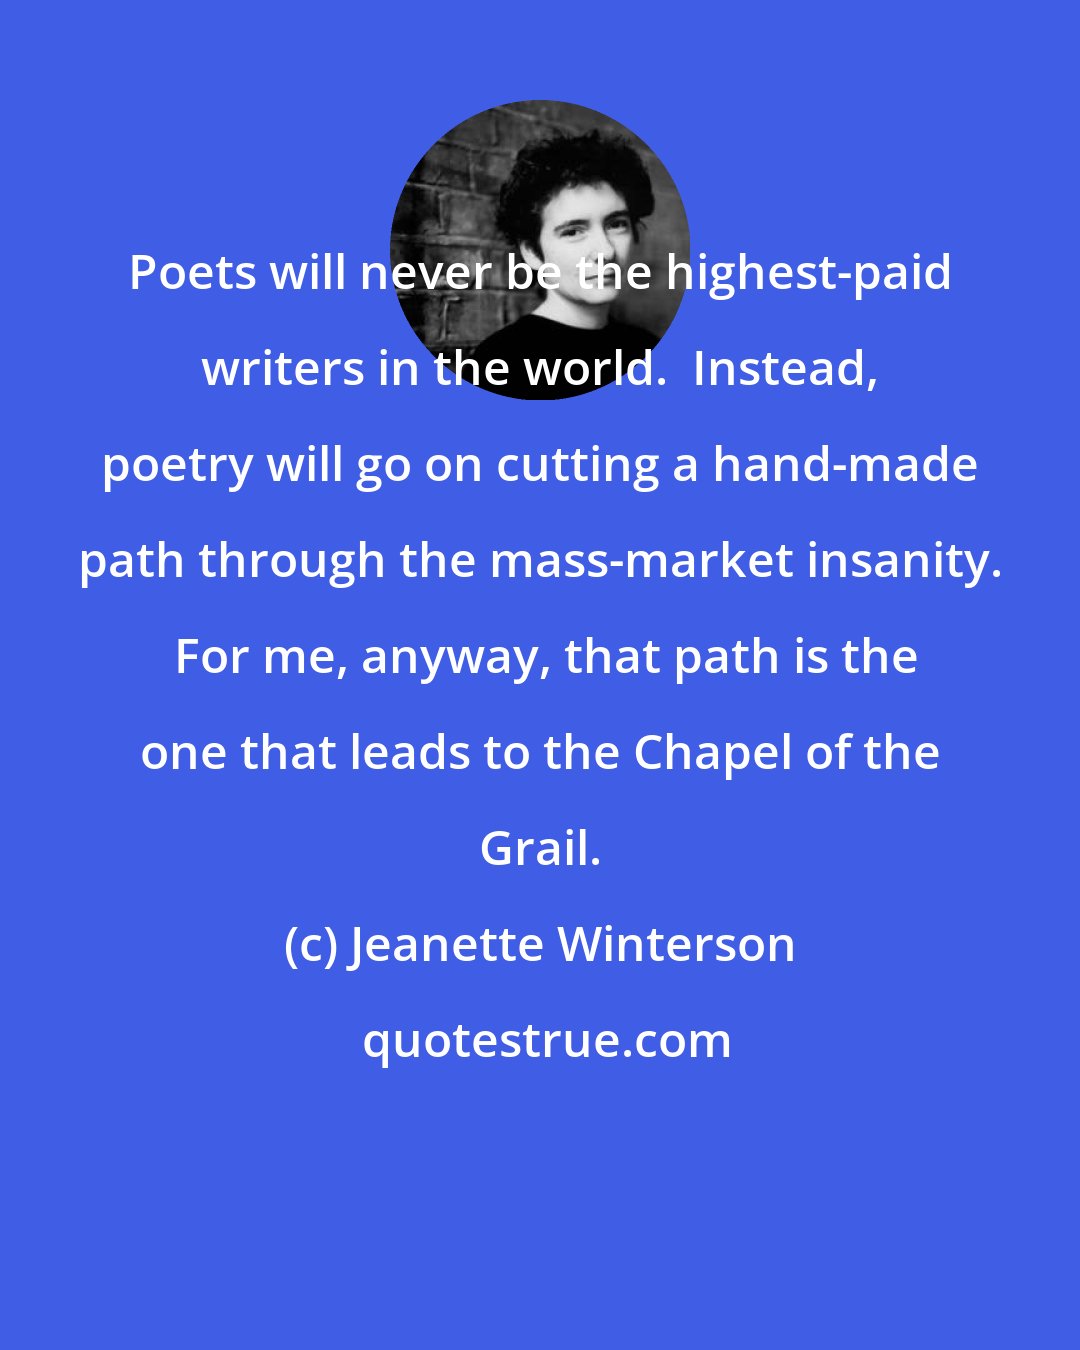 Jeanette Winterson: Poets will never be the highest-paid writers in the world.  Instead, poetry will go on cutting a hand-made path through the mass-market insanity.  For me, anyway, that path is the one that leads to the Chapel of the Grail.